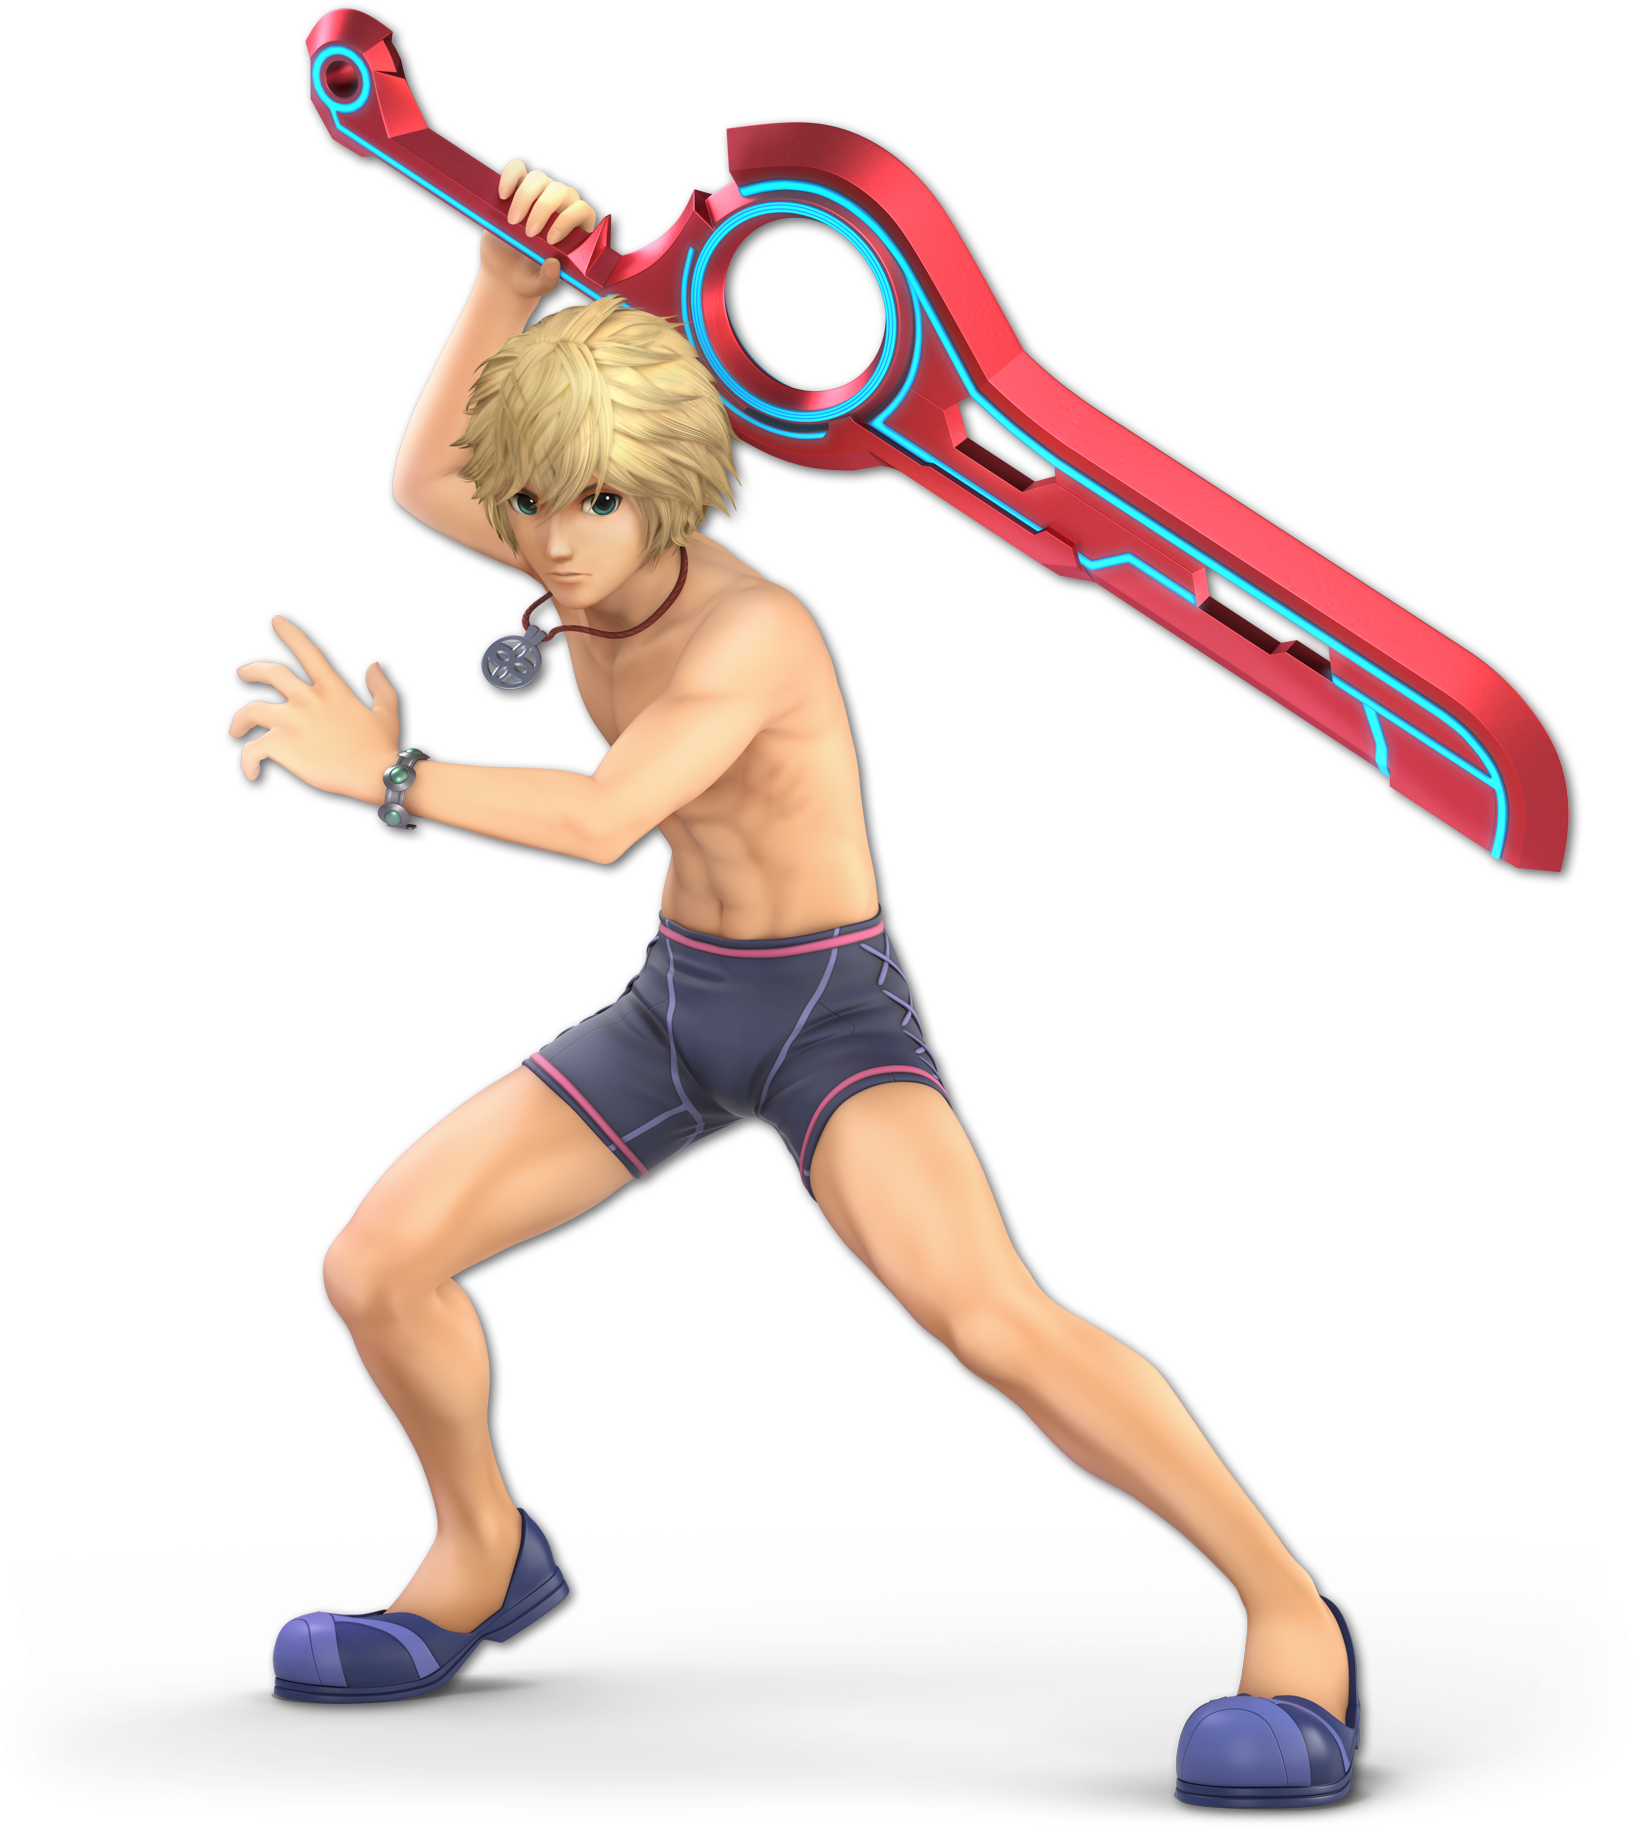 Shulk should have been classified as too lewd for Smash, lol. 